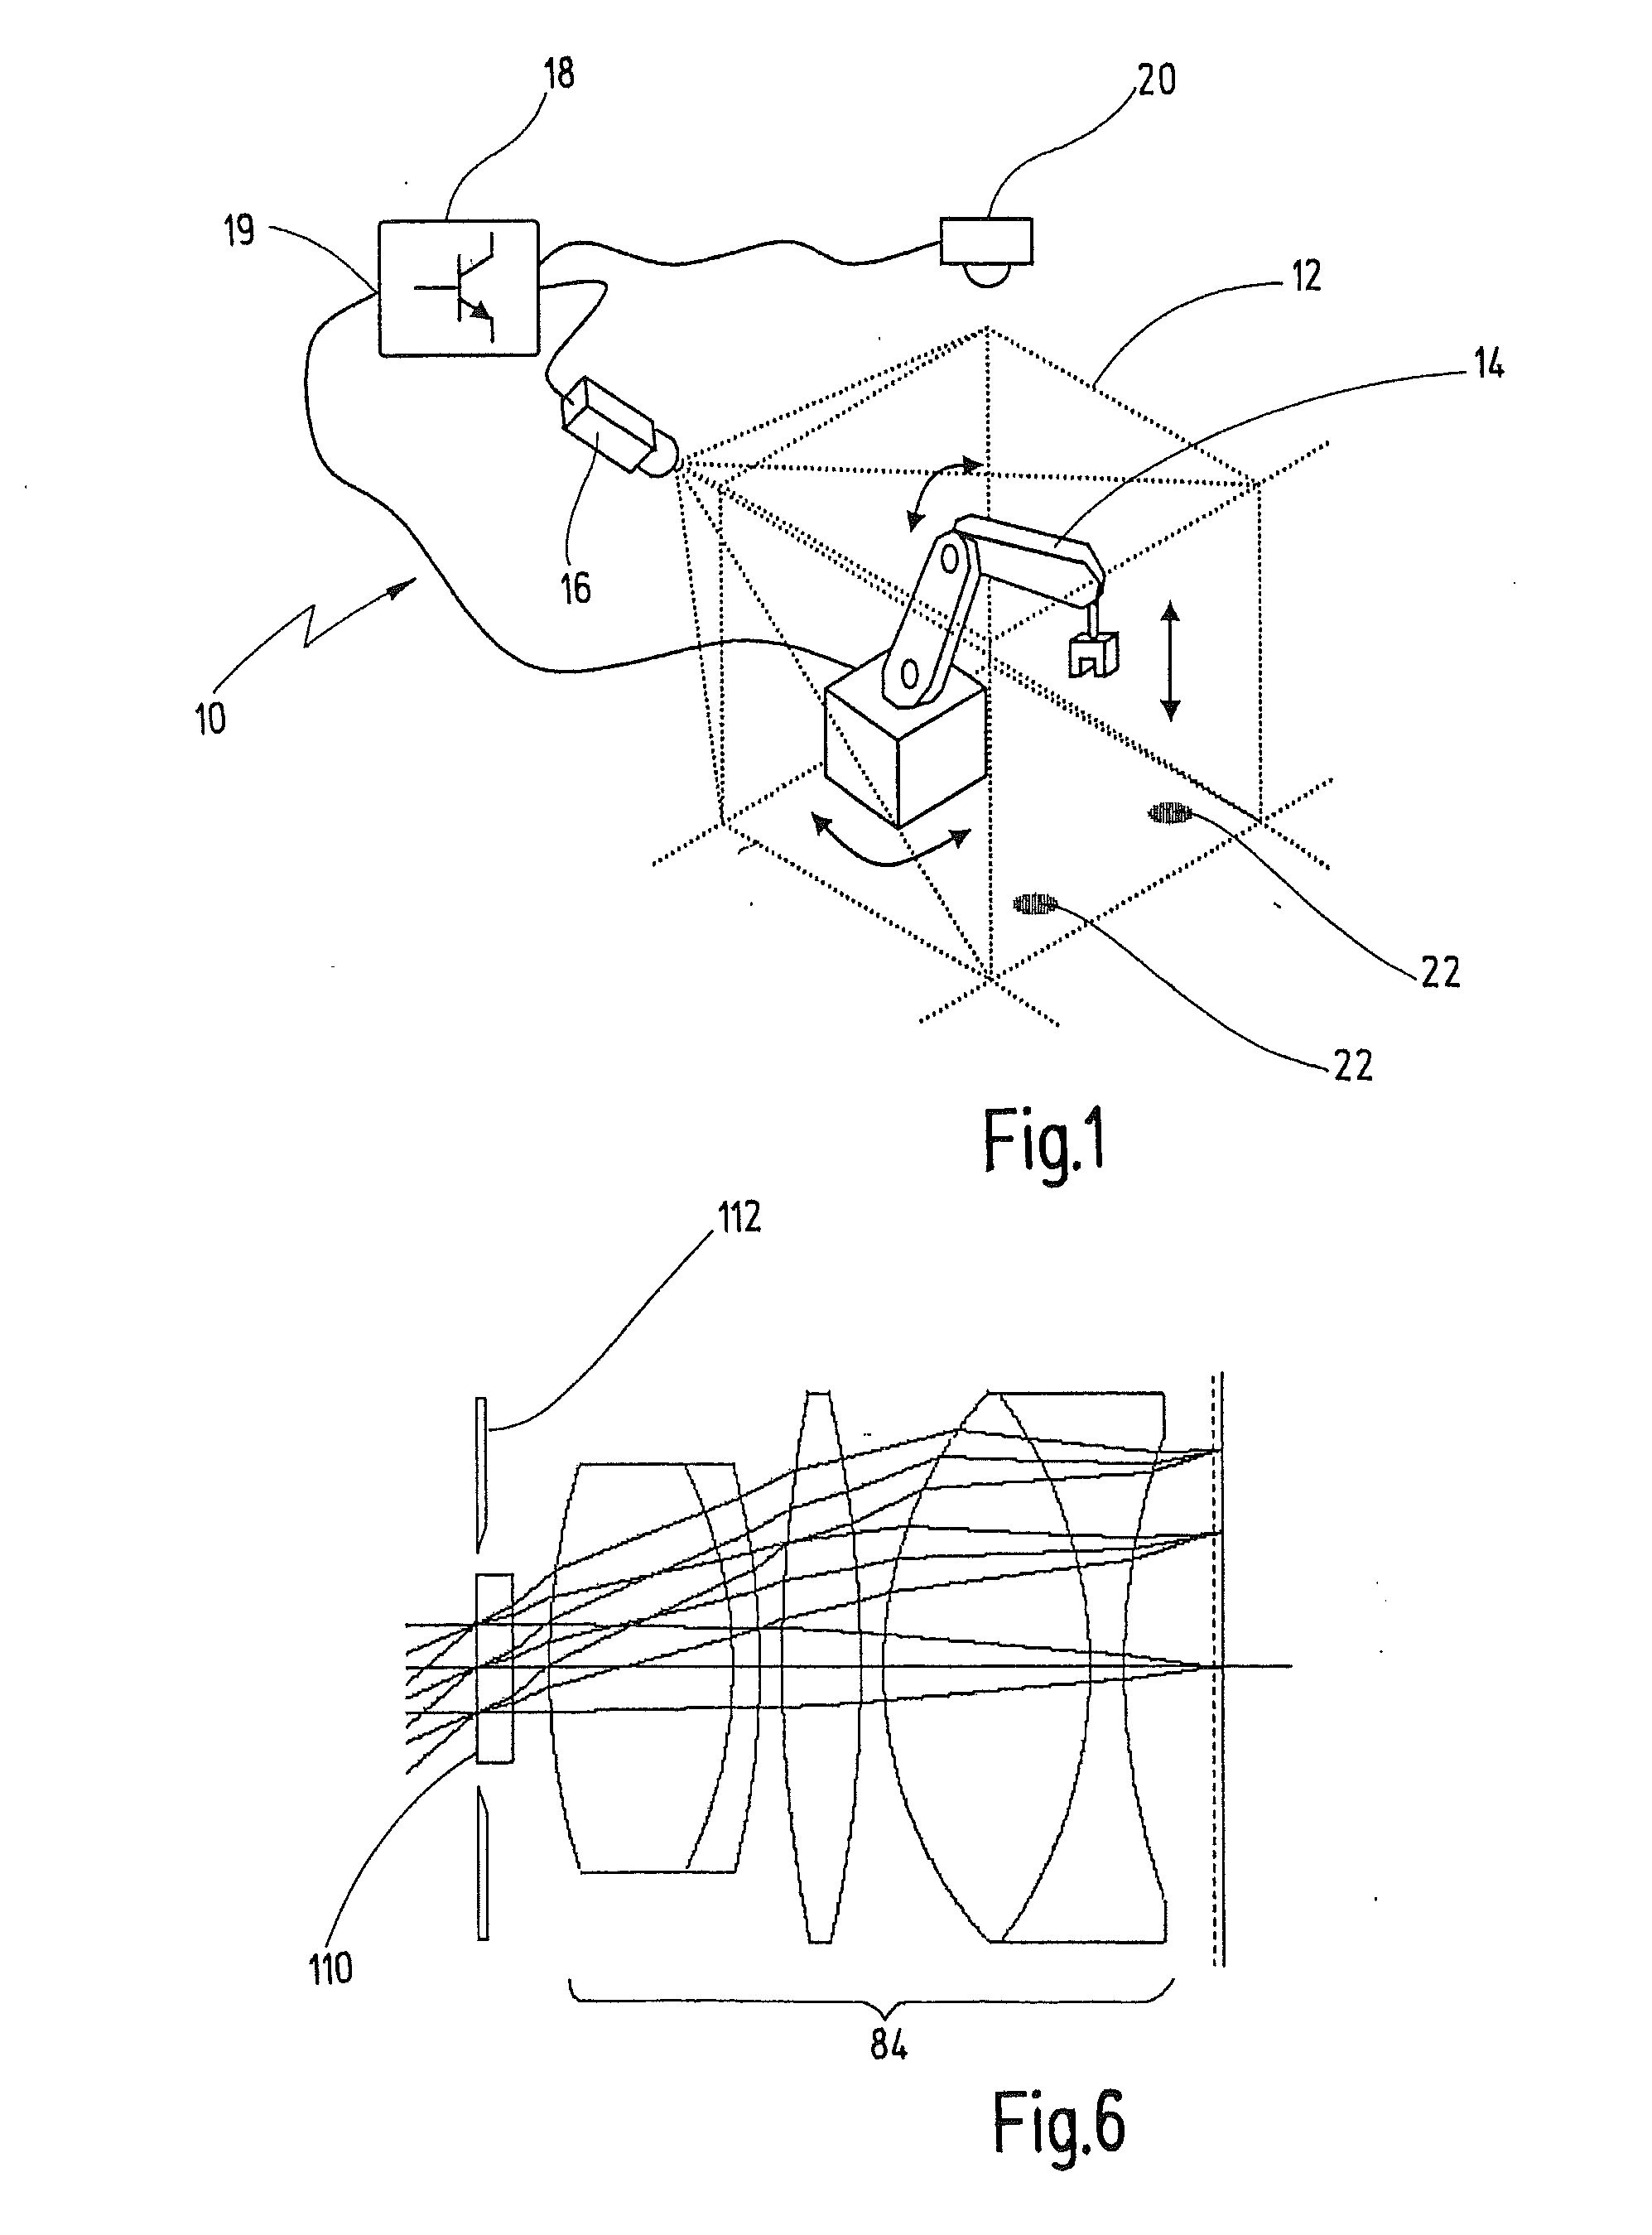 Camera system for monitoring a space area